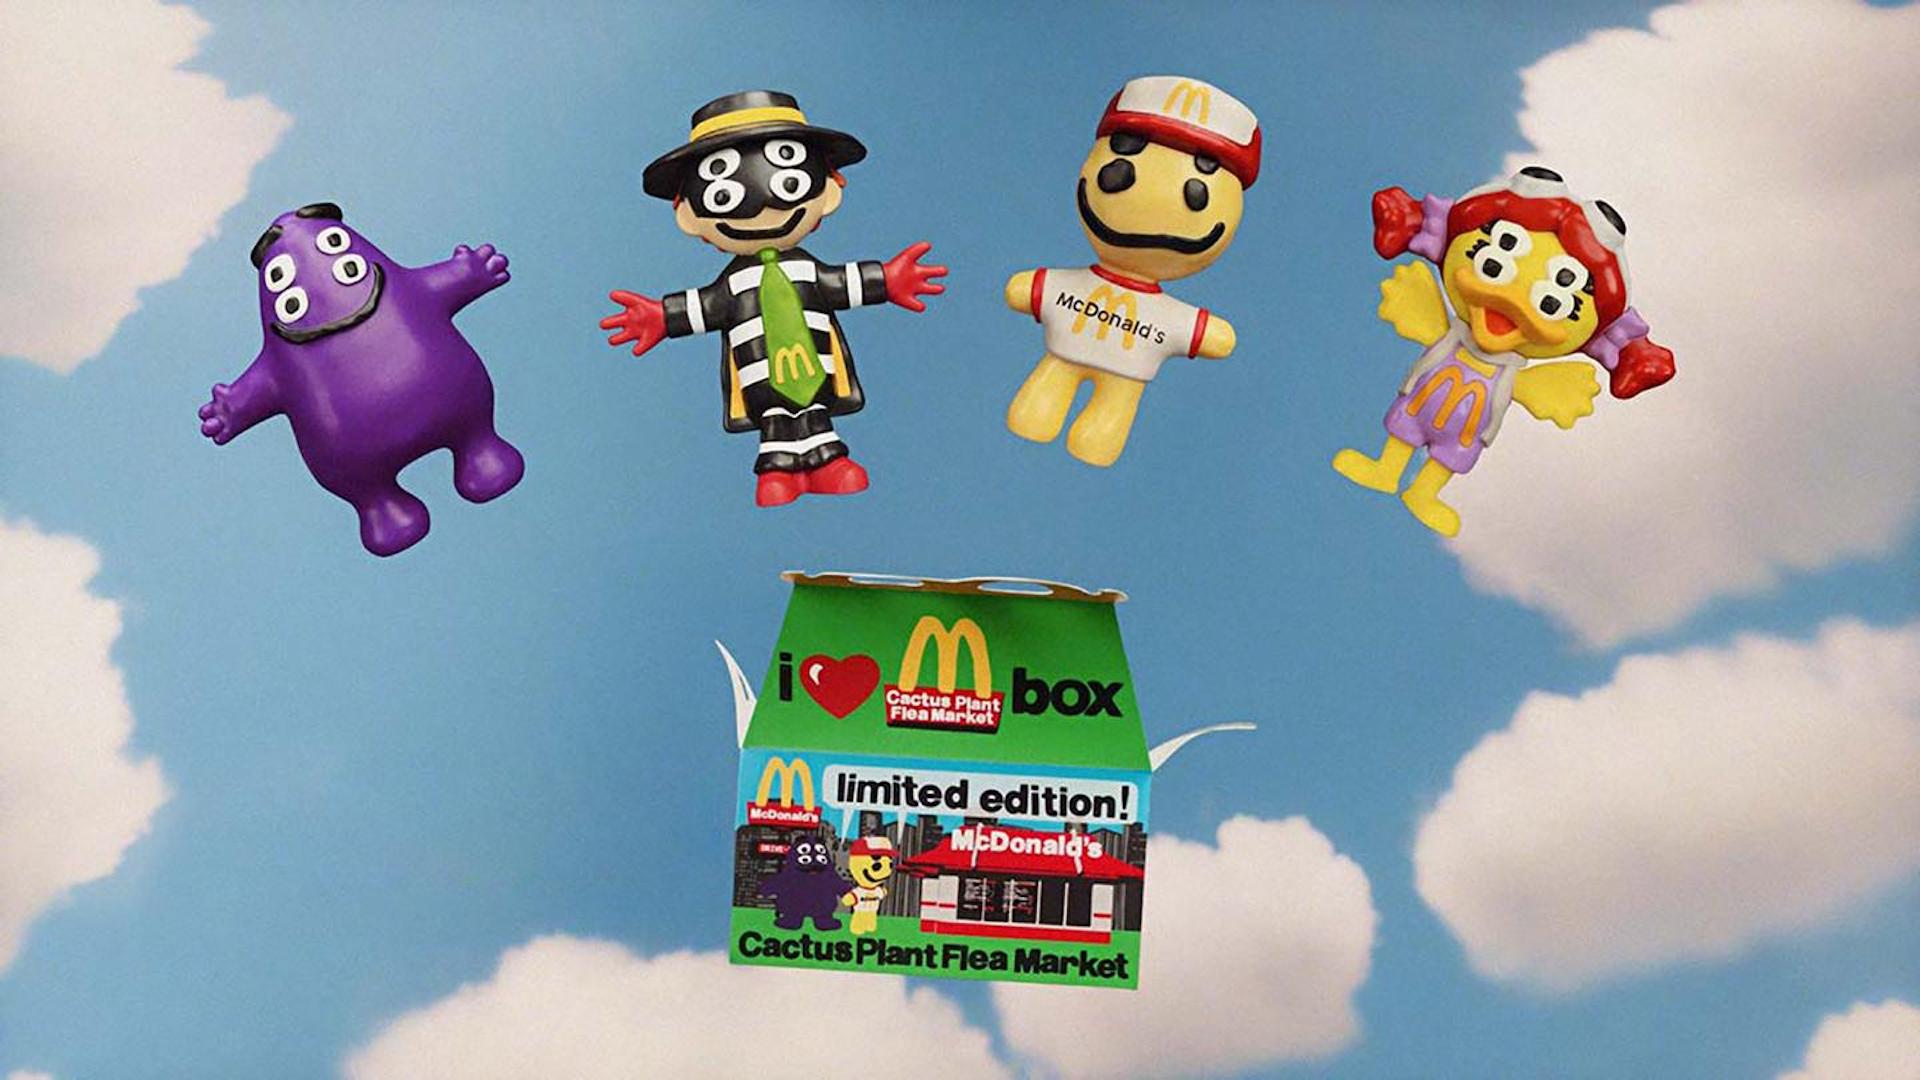 The McDonald’s and Cactus Plant Flea Market collaboration for the “Adult Happy Meal” creates a toy that is now reselling on eBay for nearly $300,000.